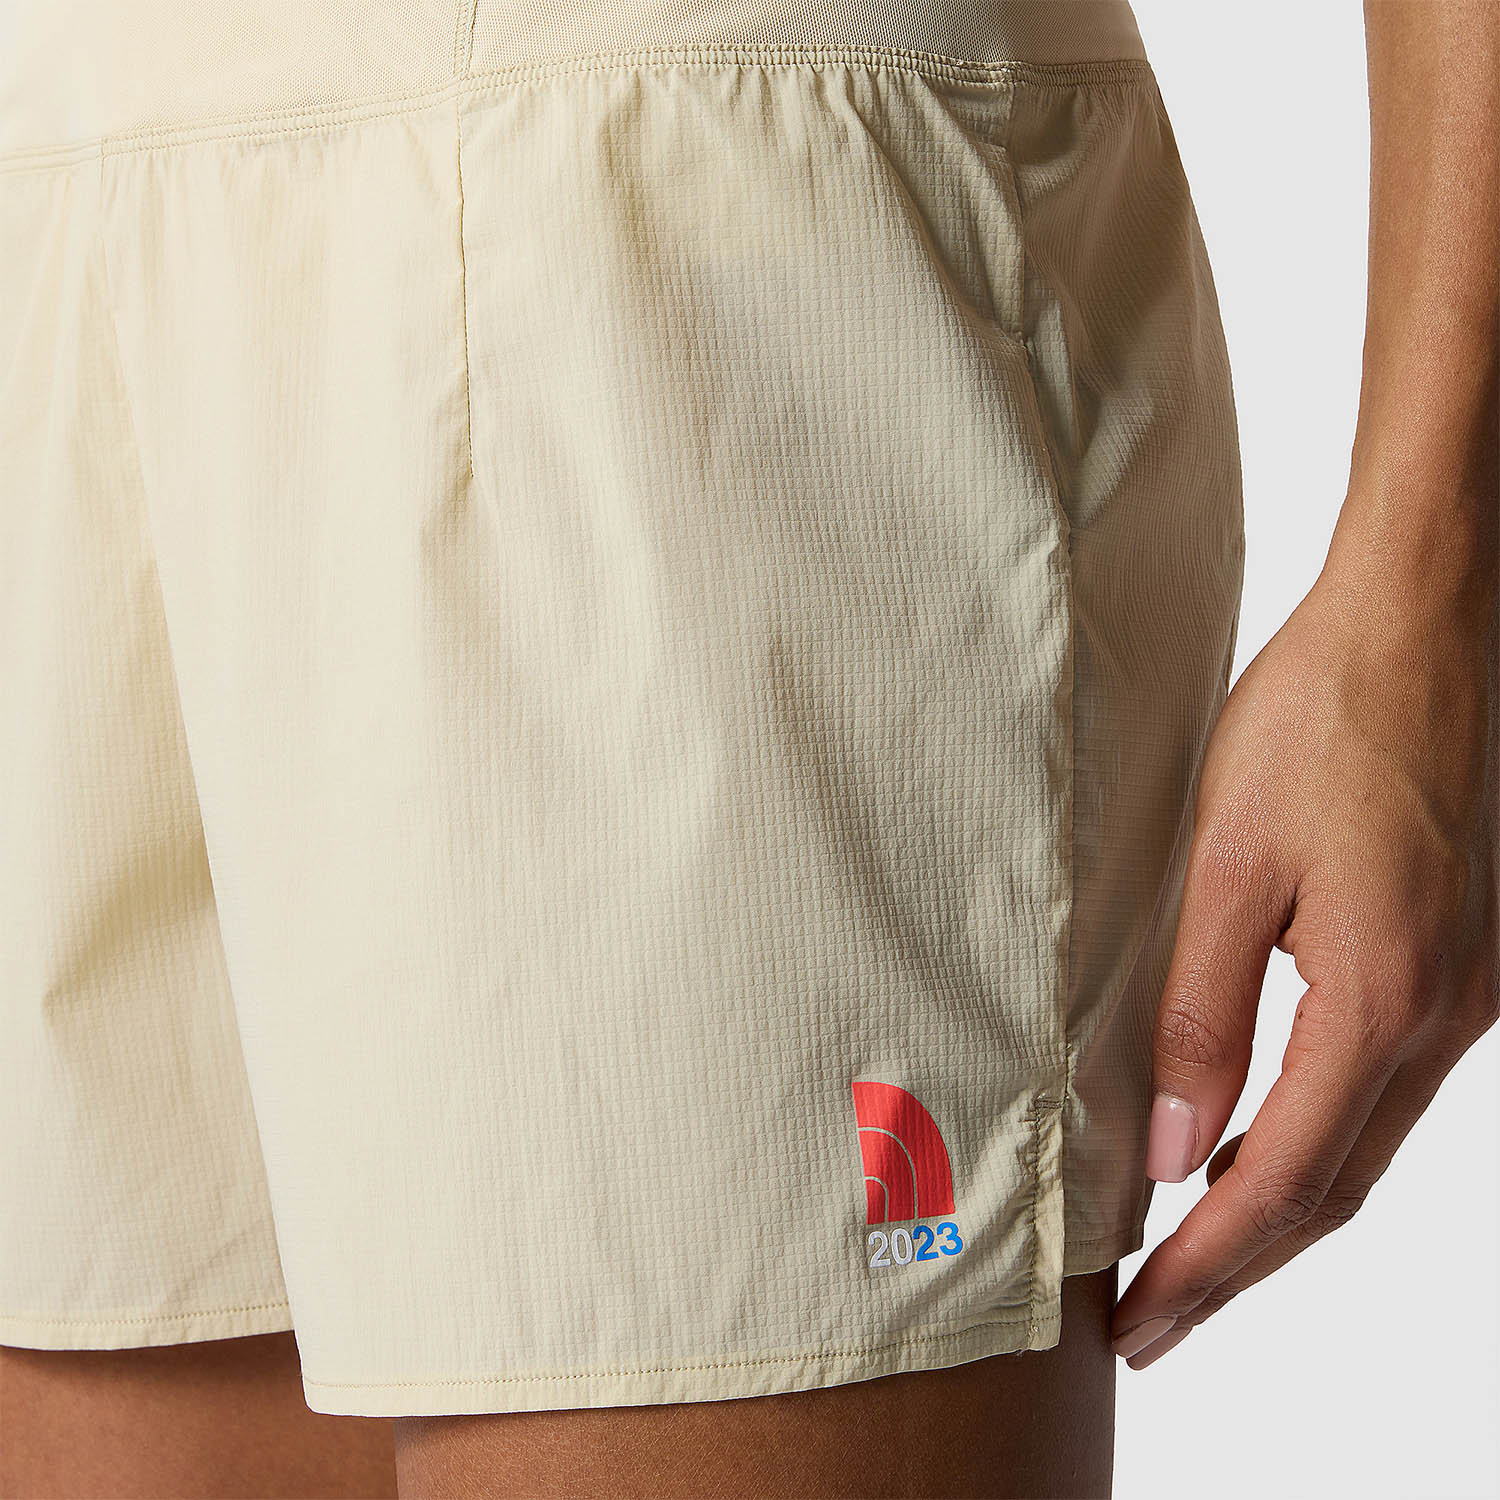 The North Face Pacesetter 5in Shorts - Gravel